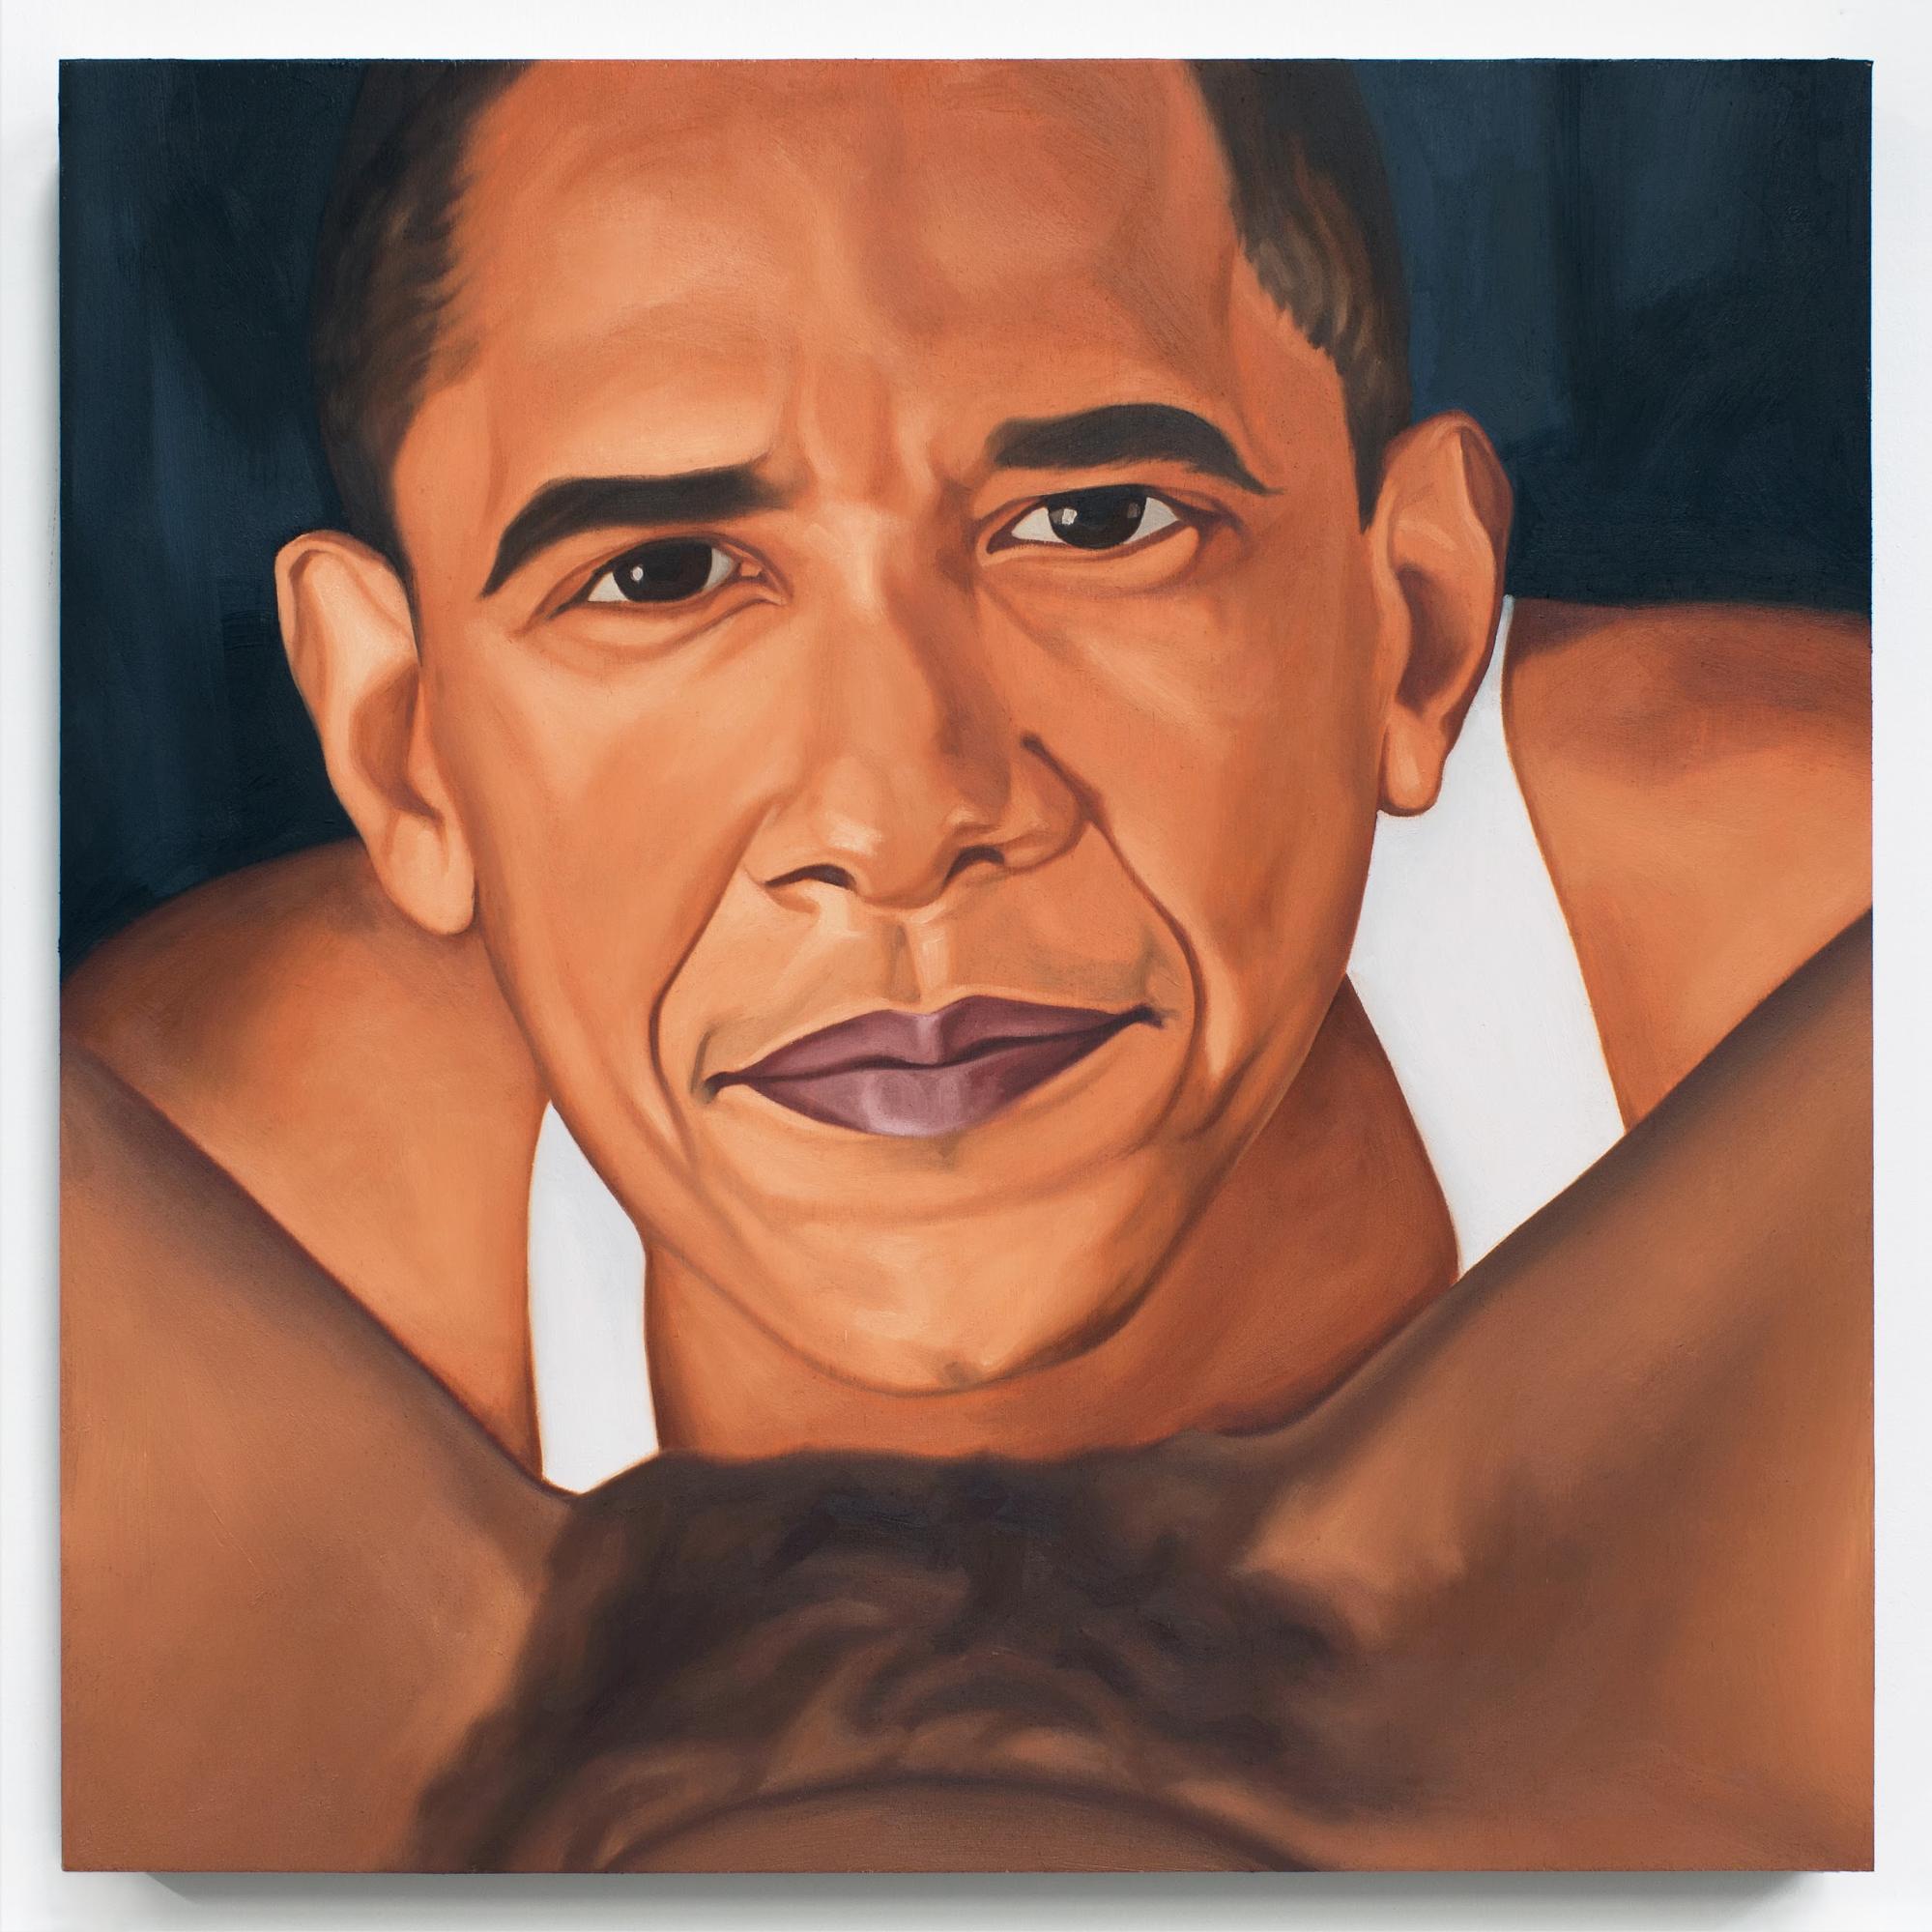 Obama boobs - 🧡 Online fight against Obama - thousands join.